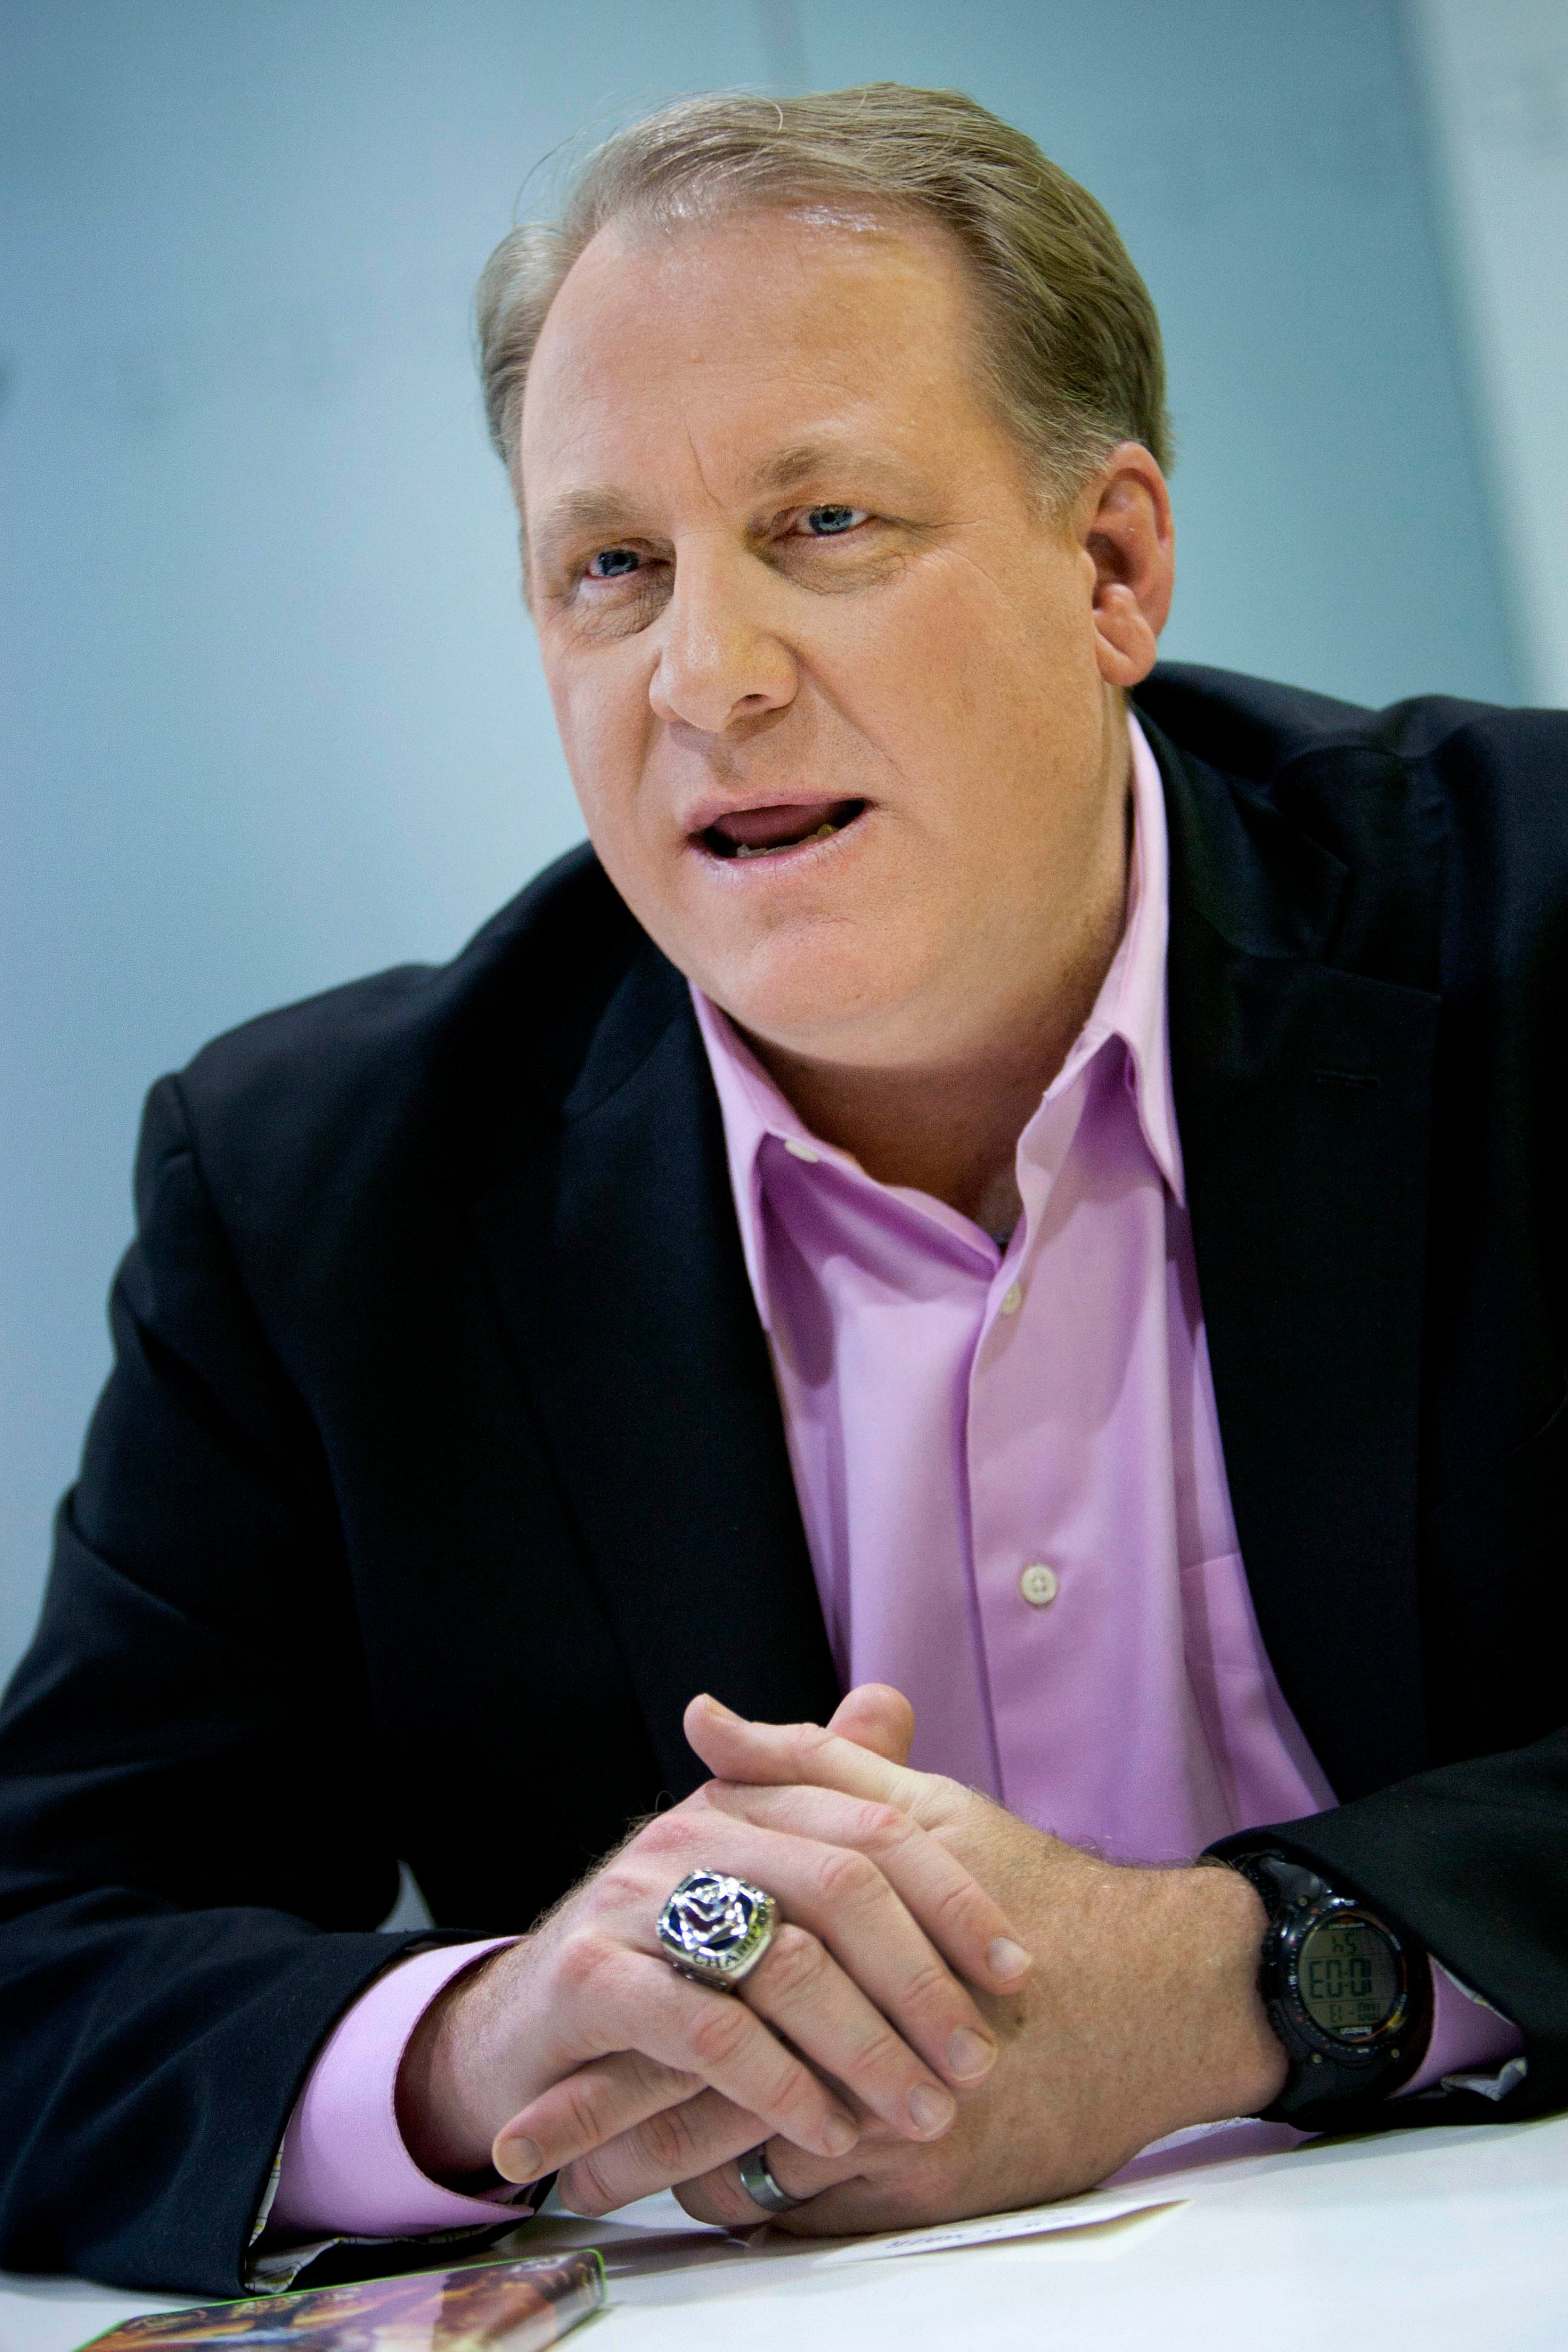 curt shilling suspension broadcasts